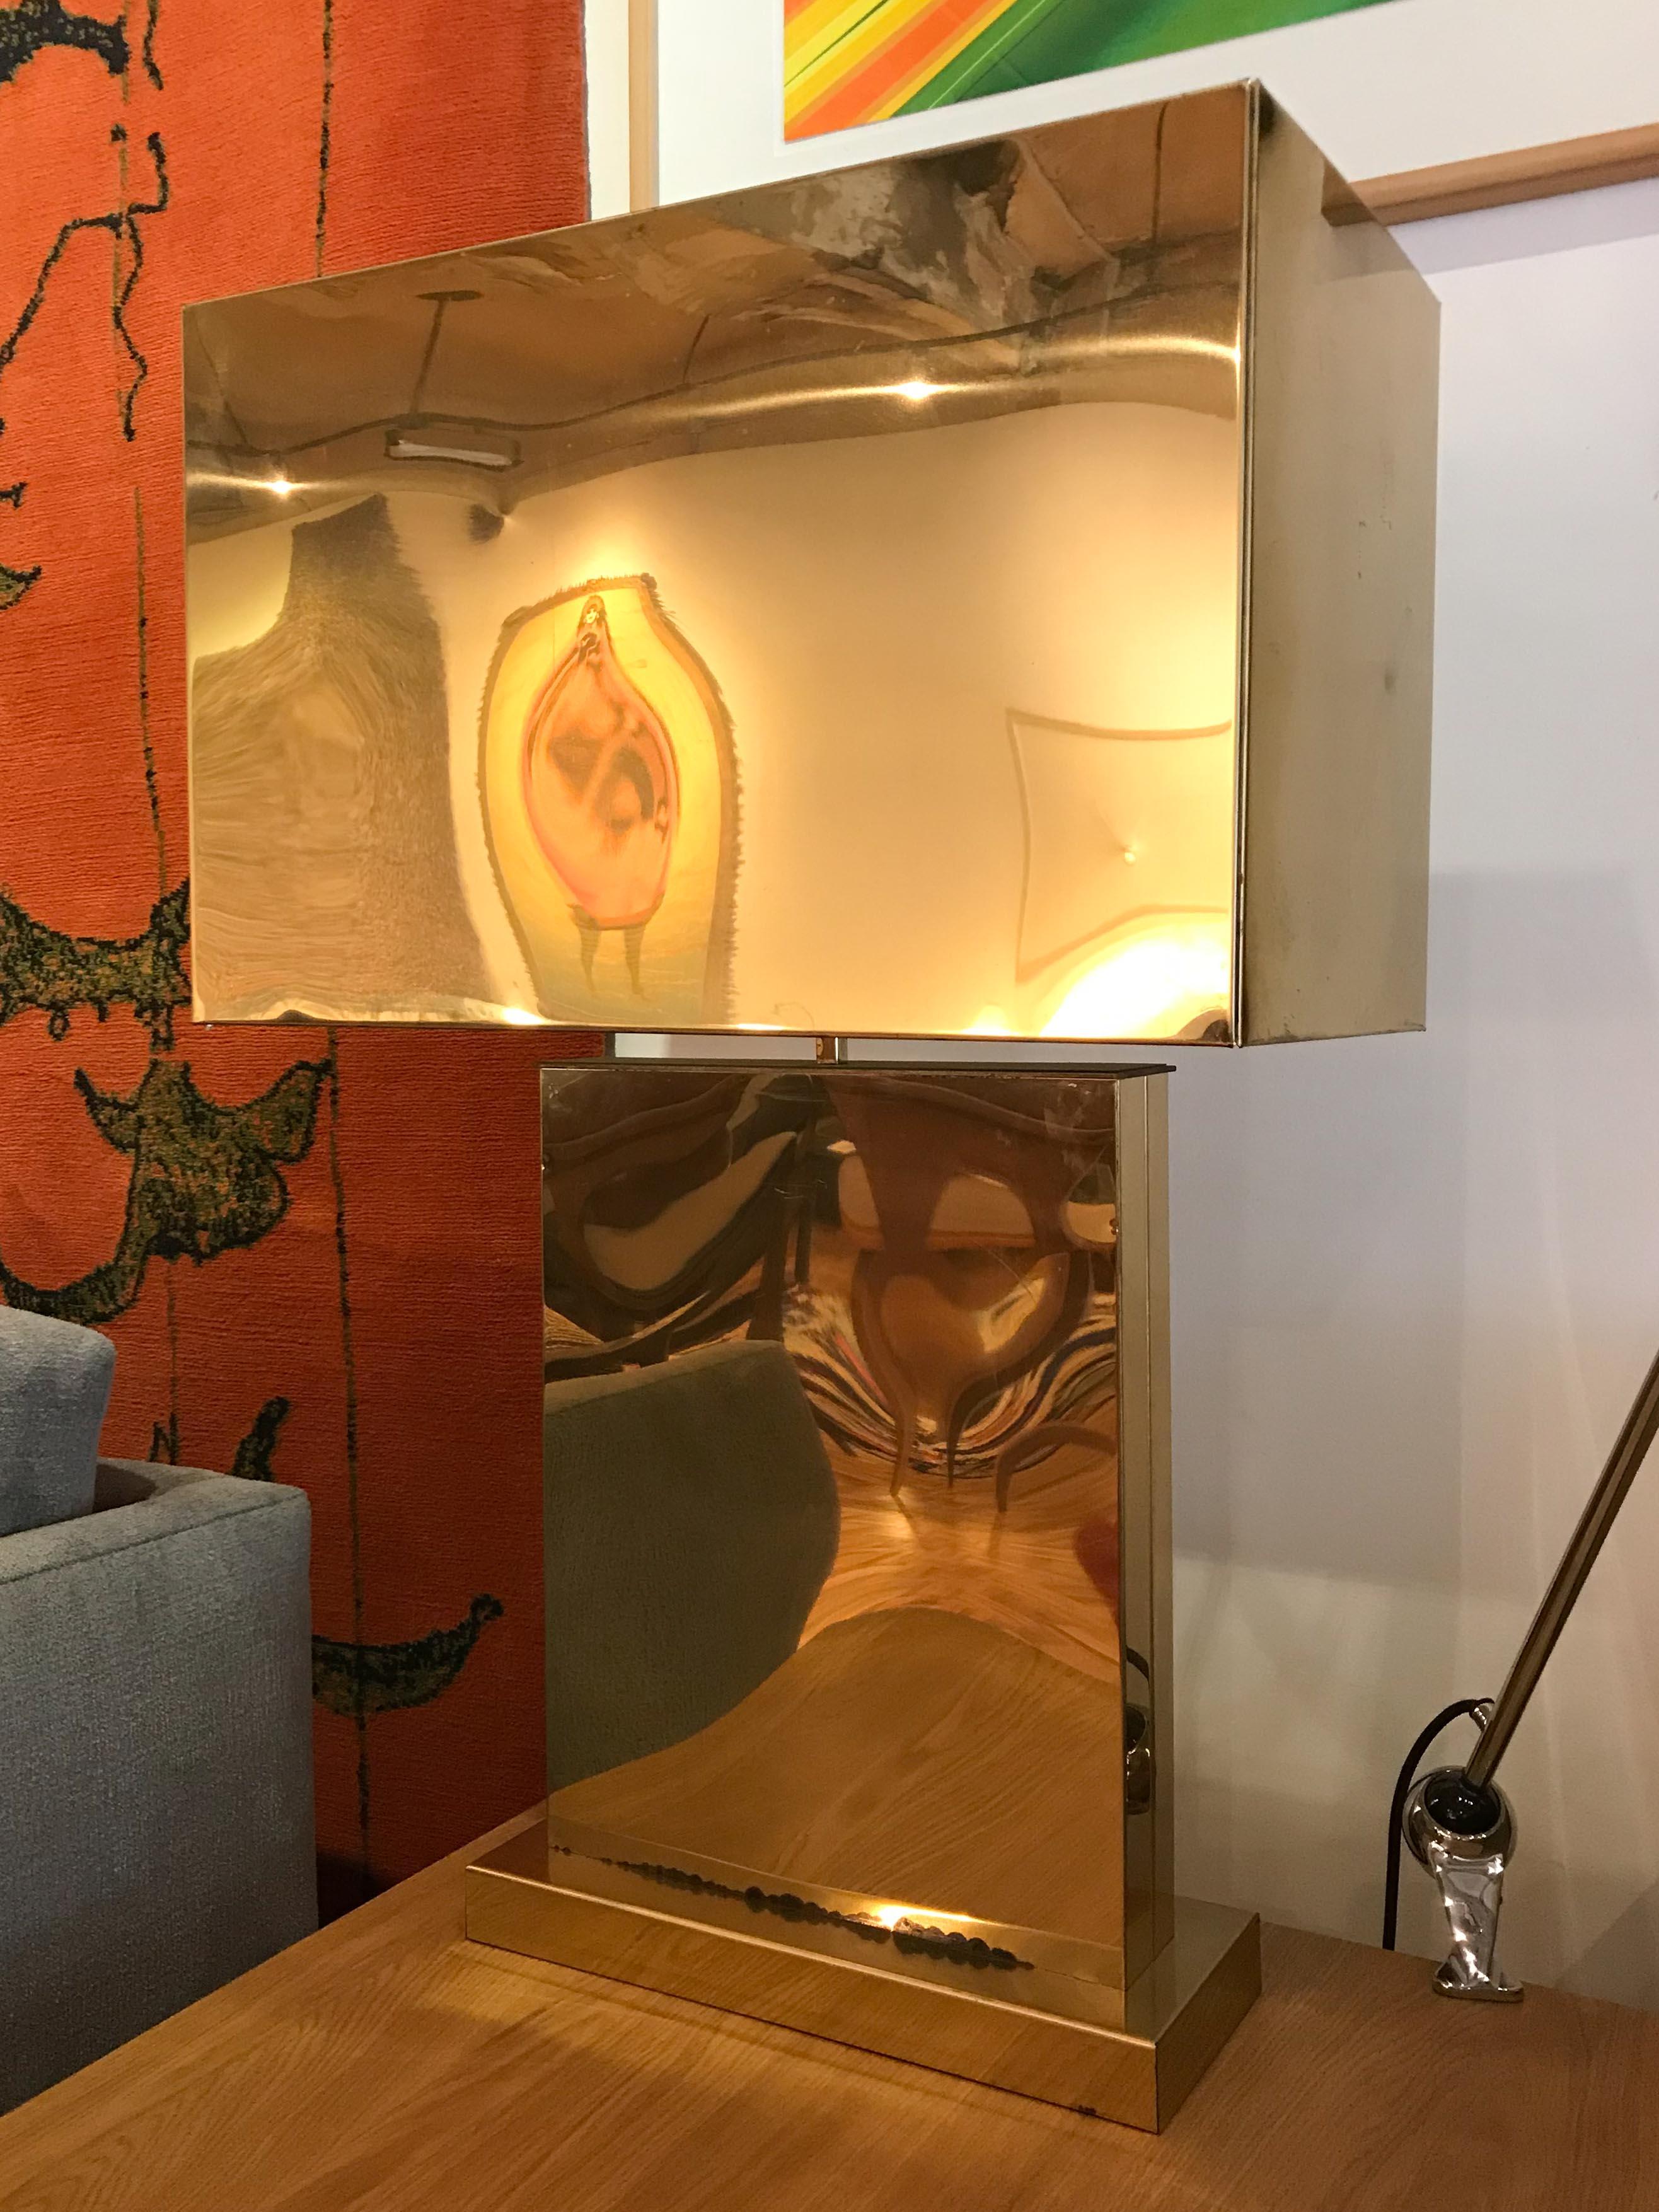 Monumental polished-brass table lamp by Curtis Jere. Very good vintage condition with normal wear and patina, some minor irregularities in the finish, small ding in shade, please see photos. Original wiring, signature on base near cord has somewhat